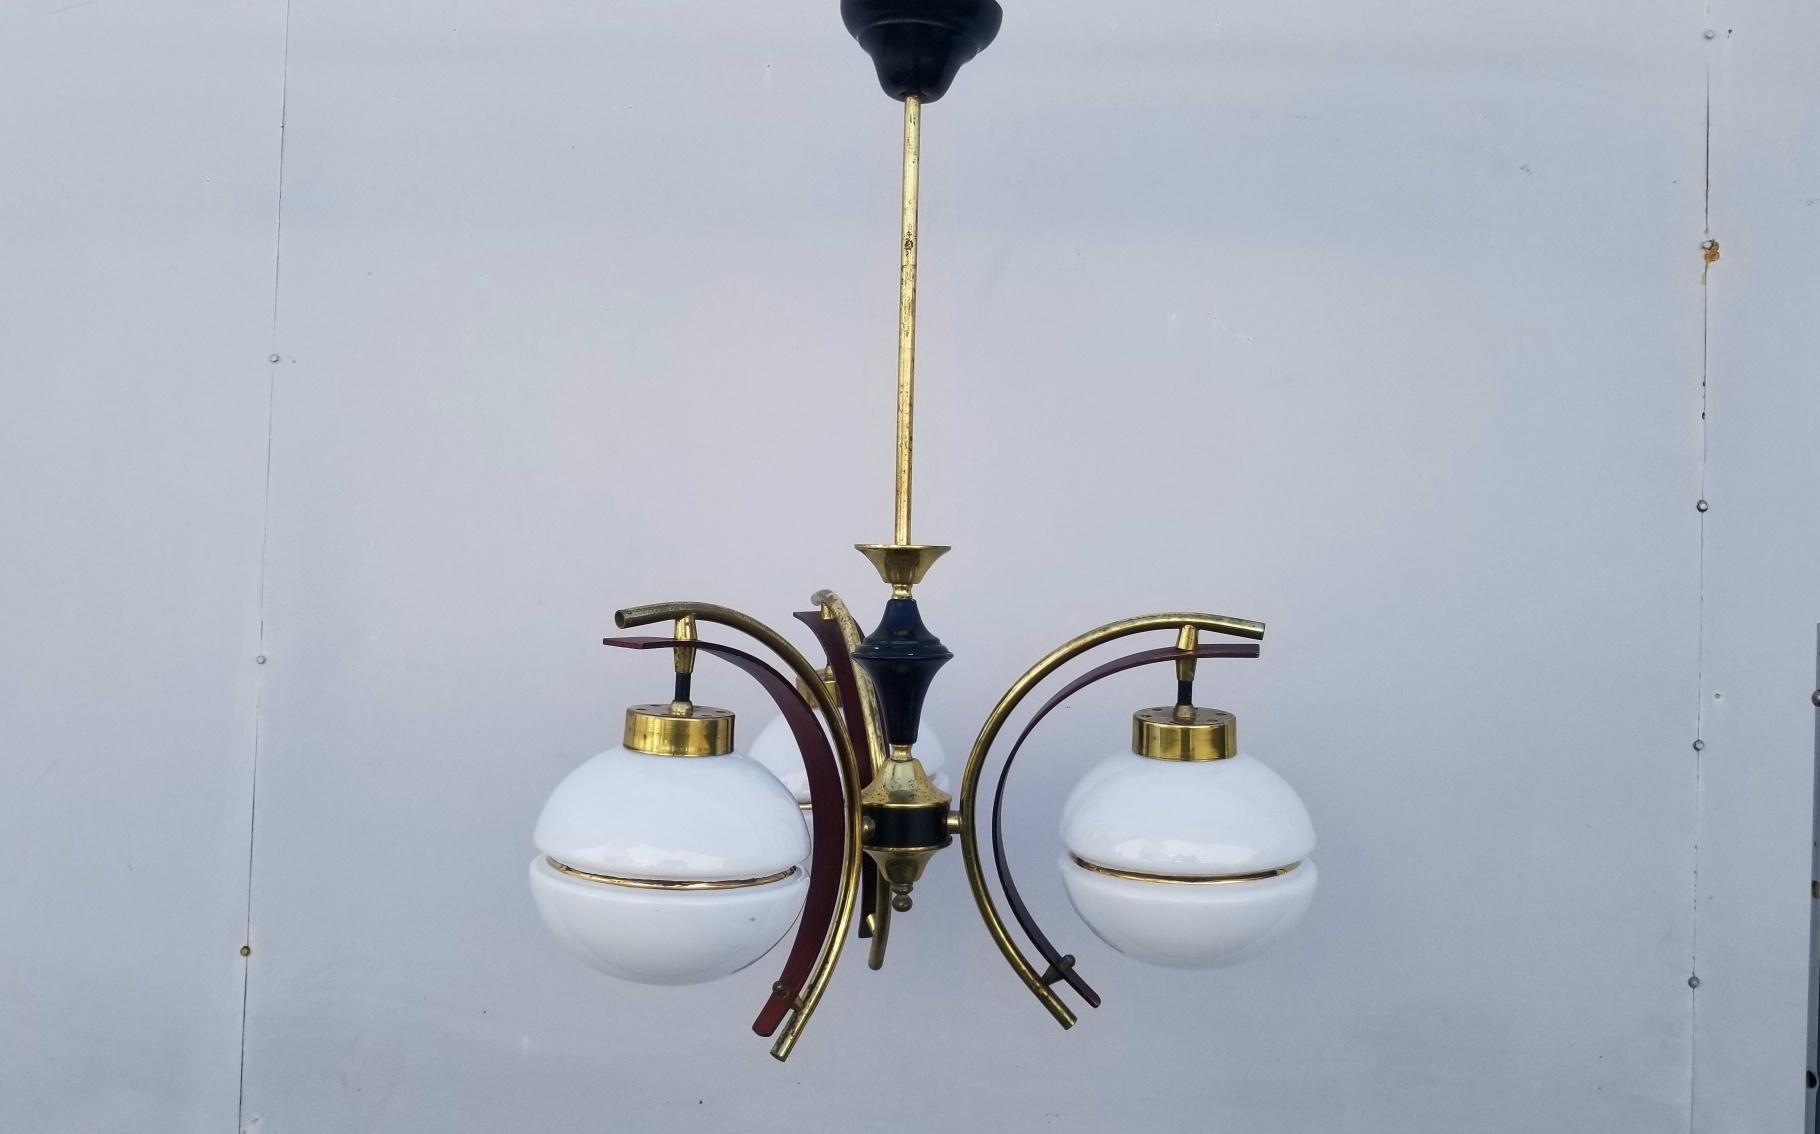 Italian chandelier from the 1950s, wood brass and 3 glass Murano glass shade.